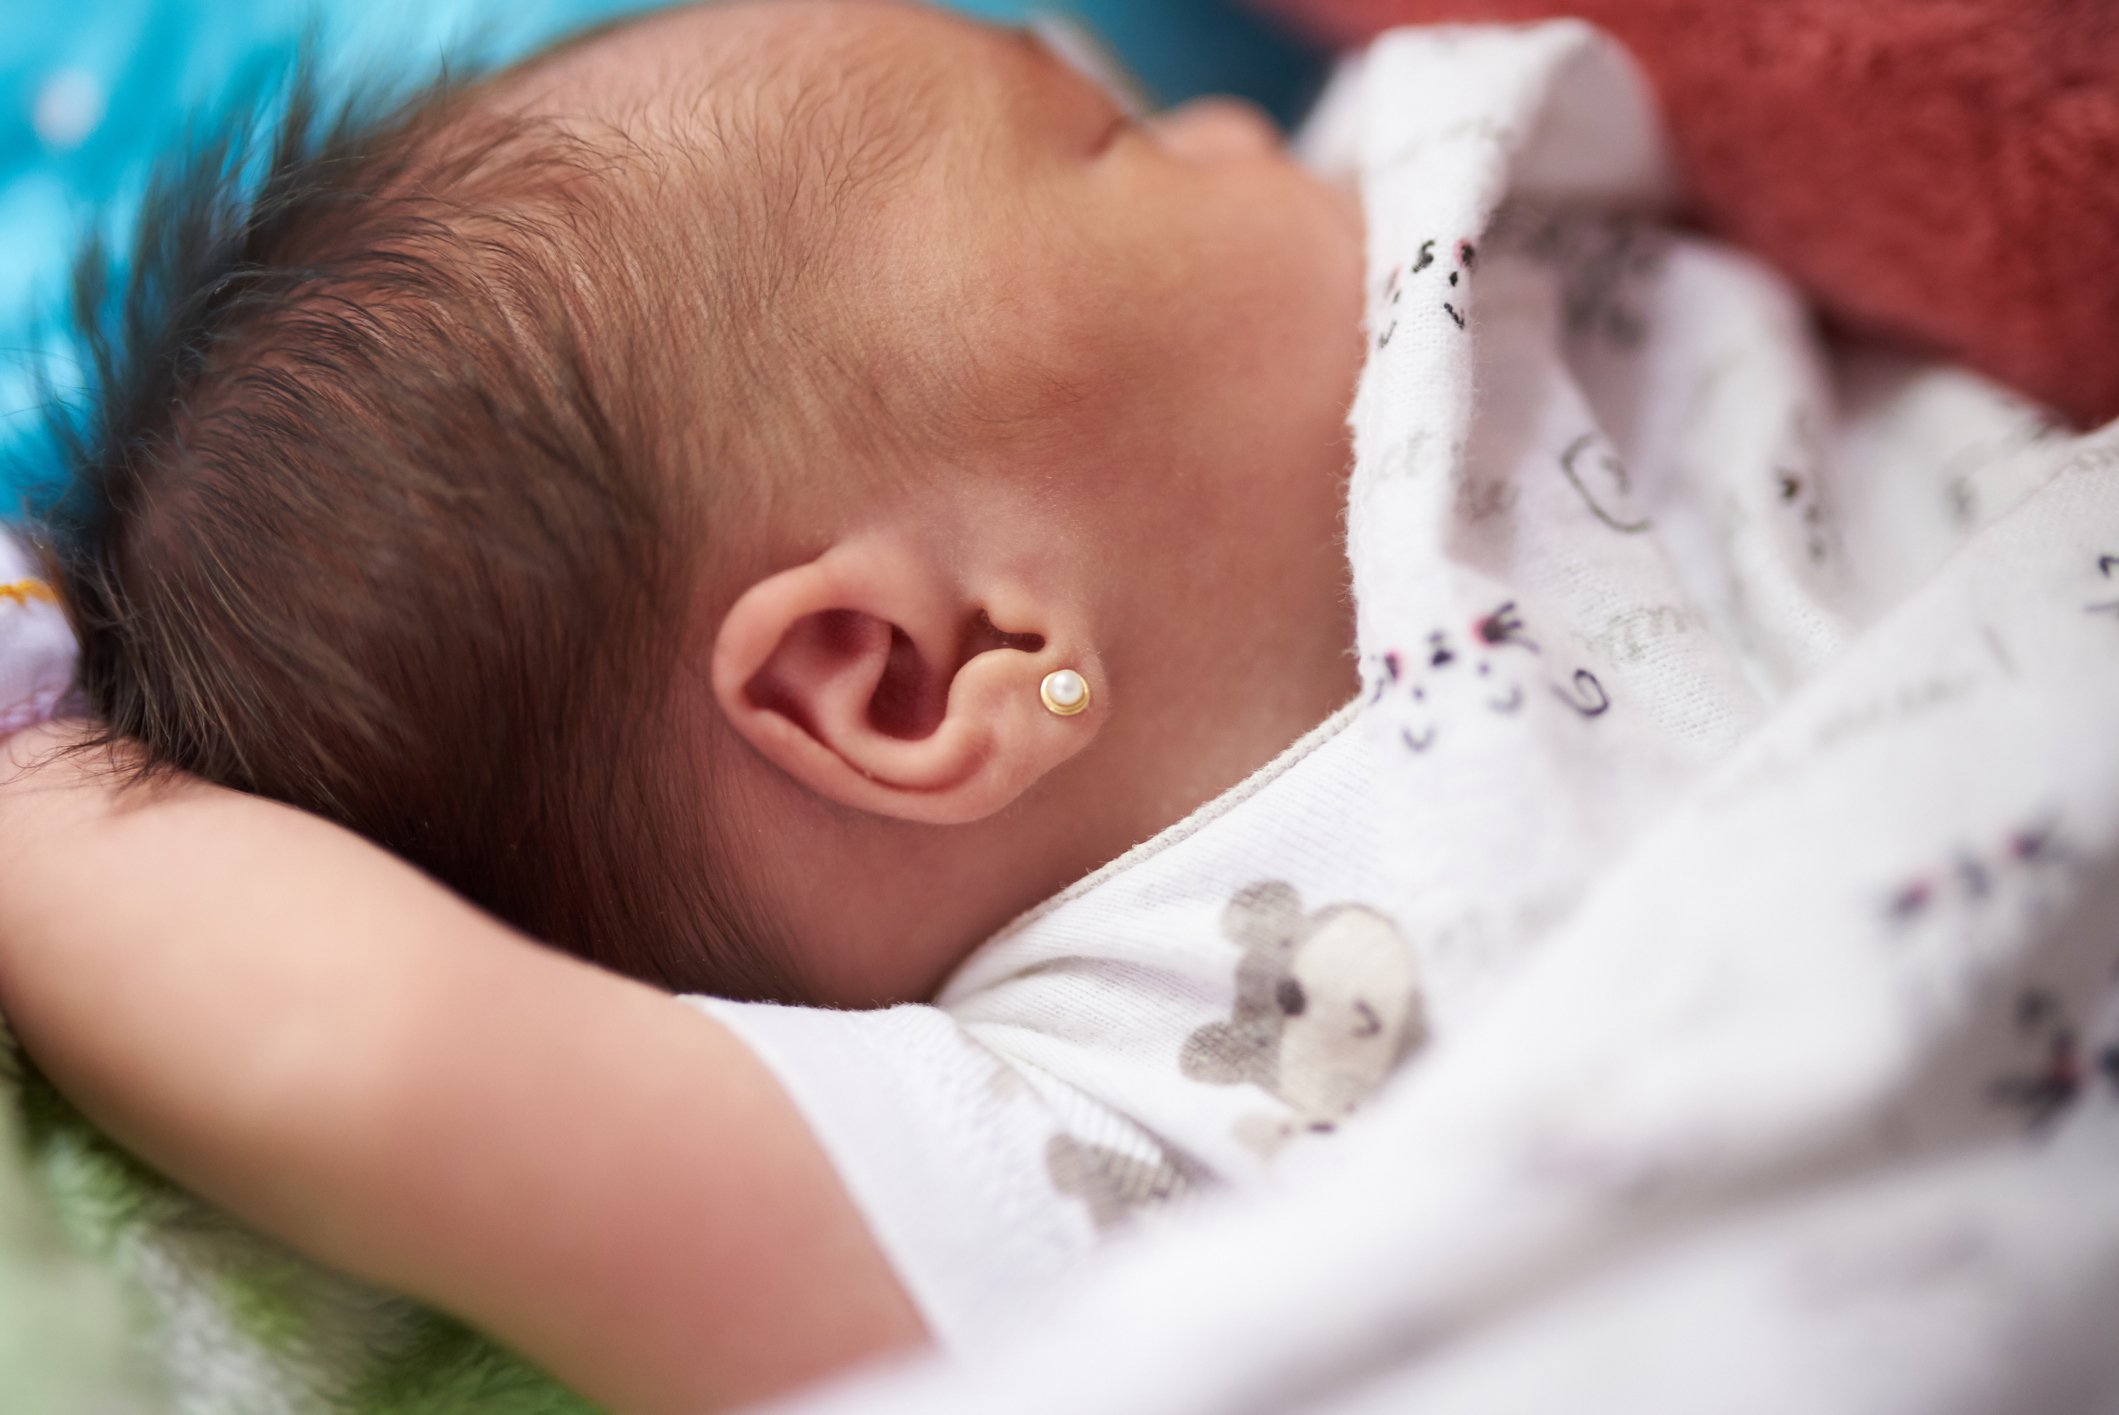 Baby wearing pearl-studded earrings | Photo: Getty Images 